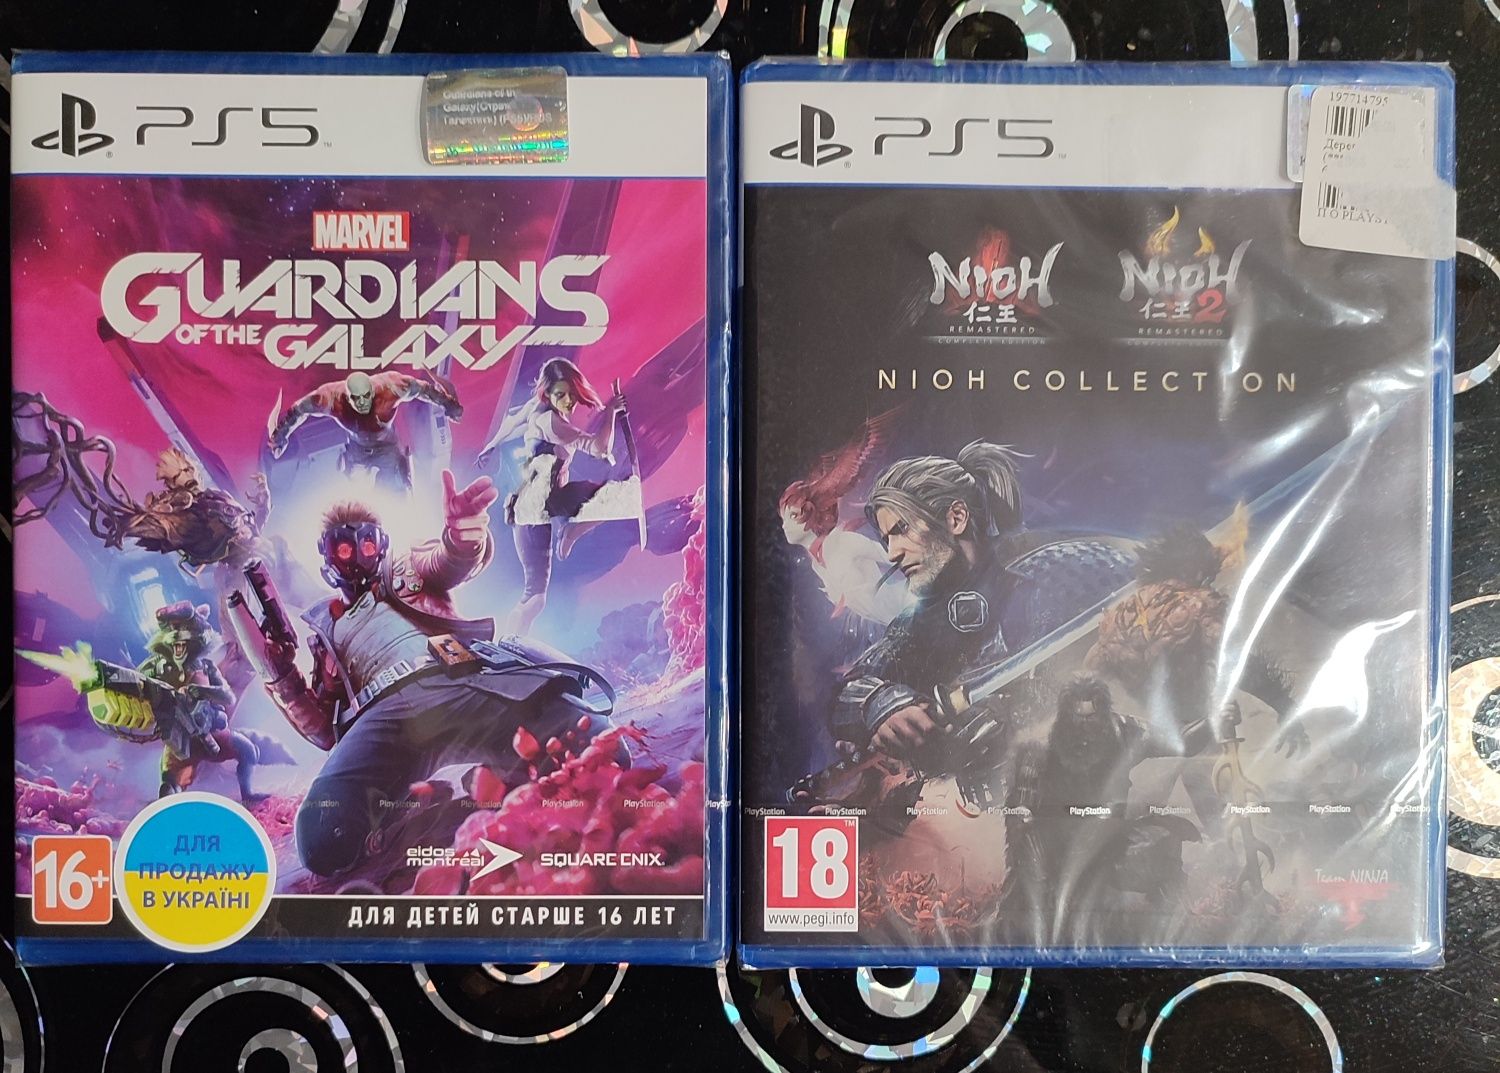 Guardians of the galaxy Ps5, Nioh Collection Ps5